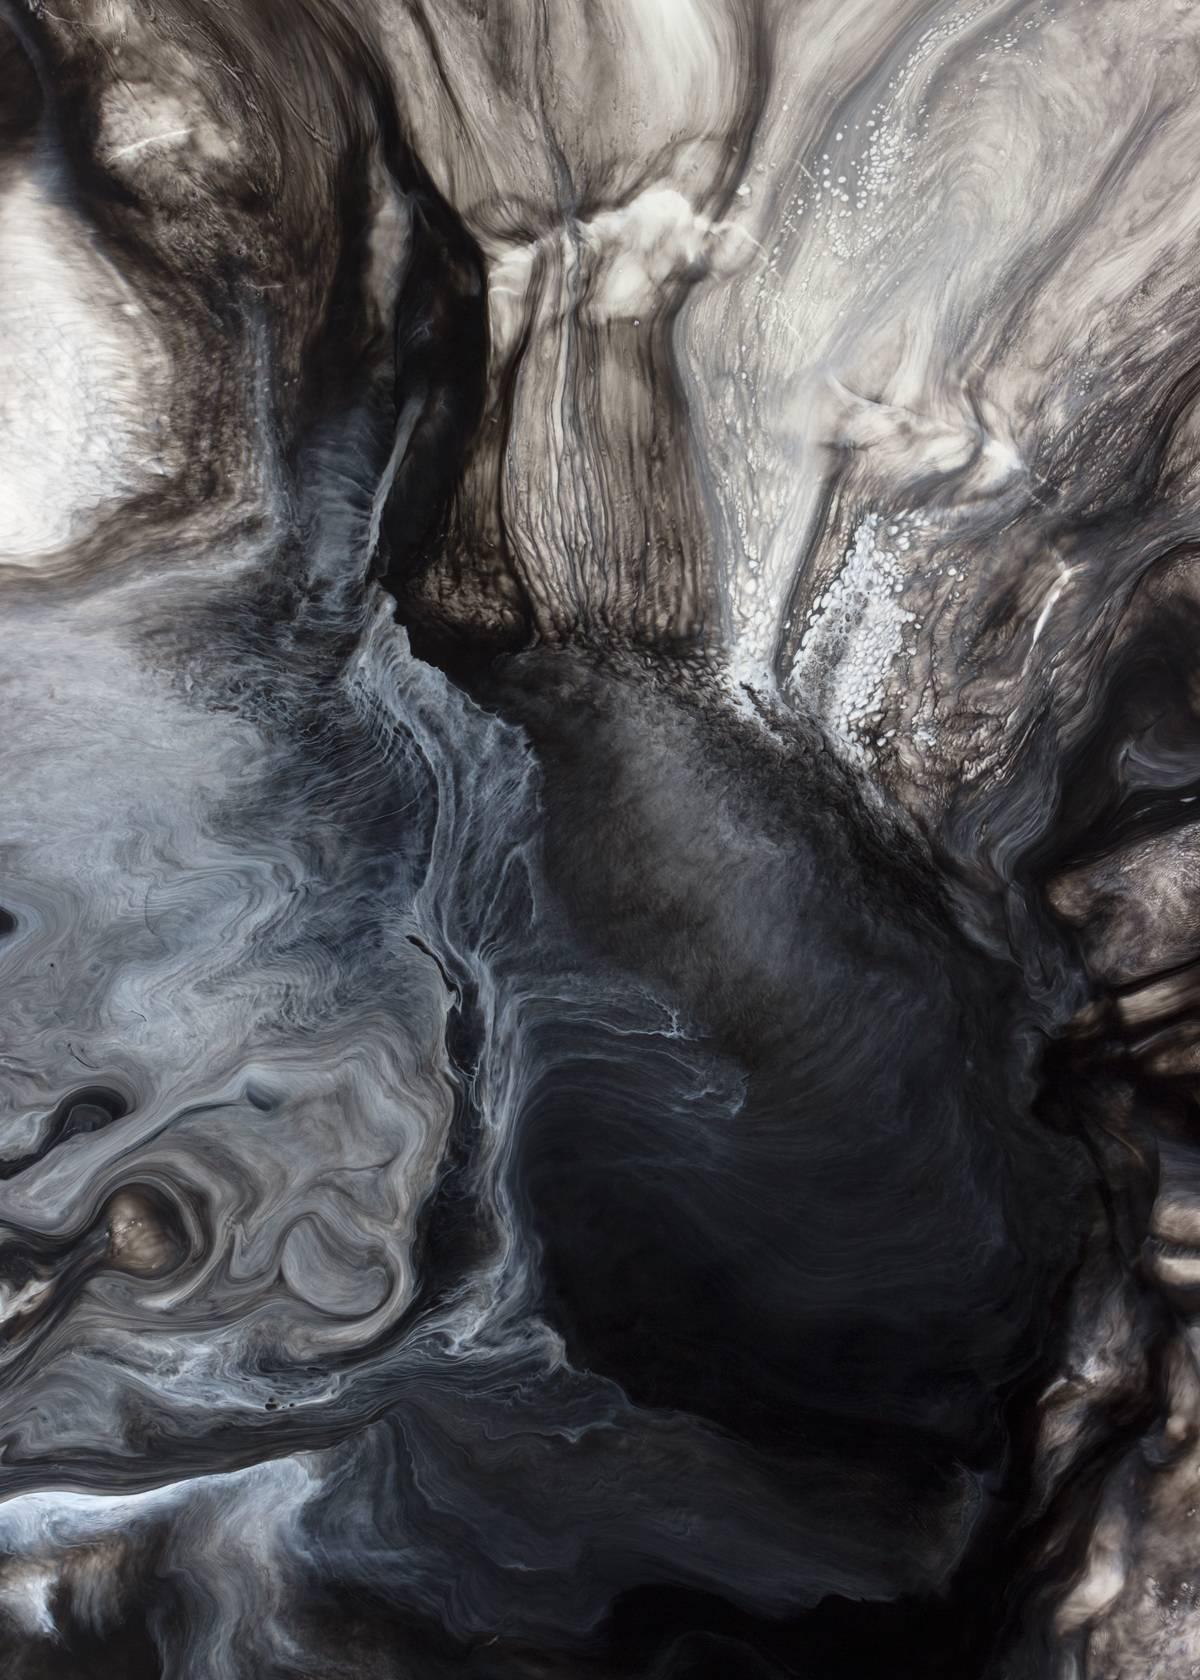 Metamorphic' wax painting by Lonney White available from LMD/studio. 

LMD/studio artist Lonney White III has been producing wax encaustic and metal alloy paintings for the past 7 years. His artworks are in countless private collections and